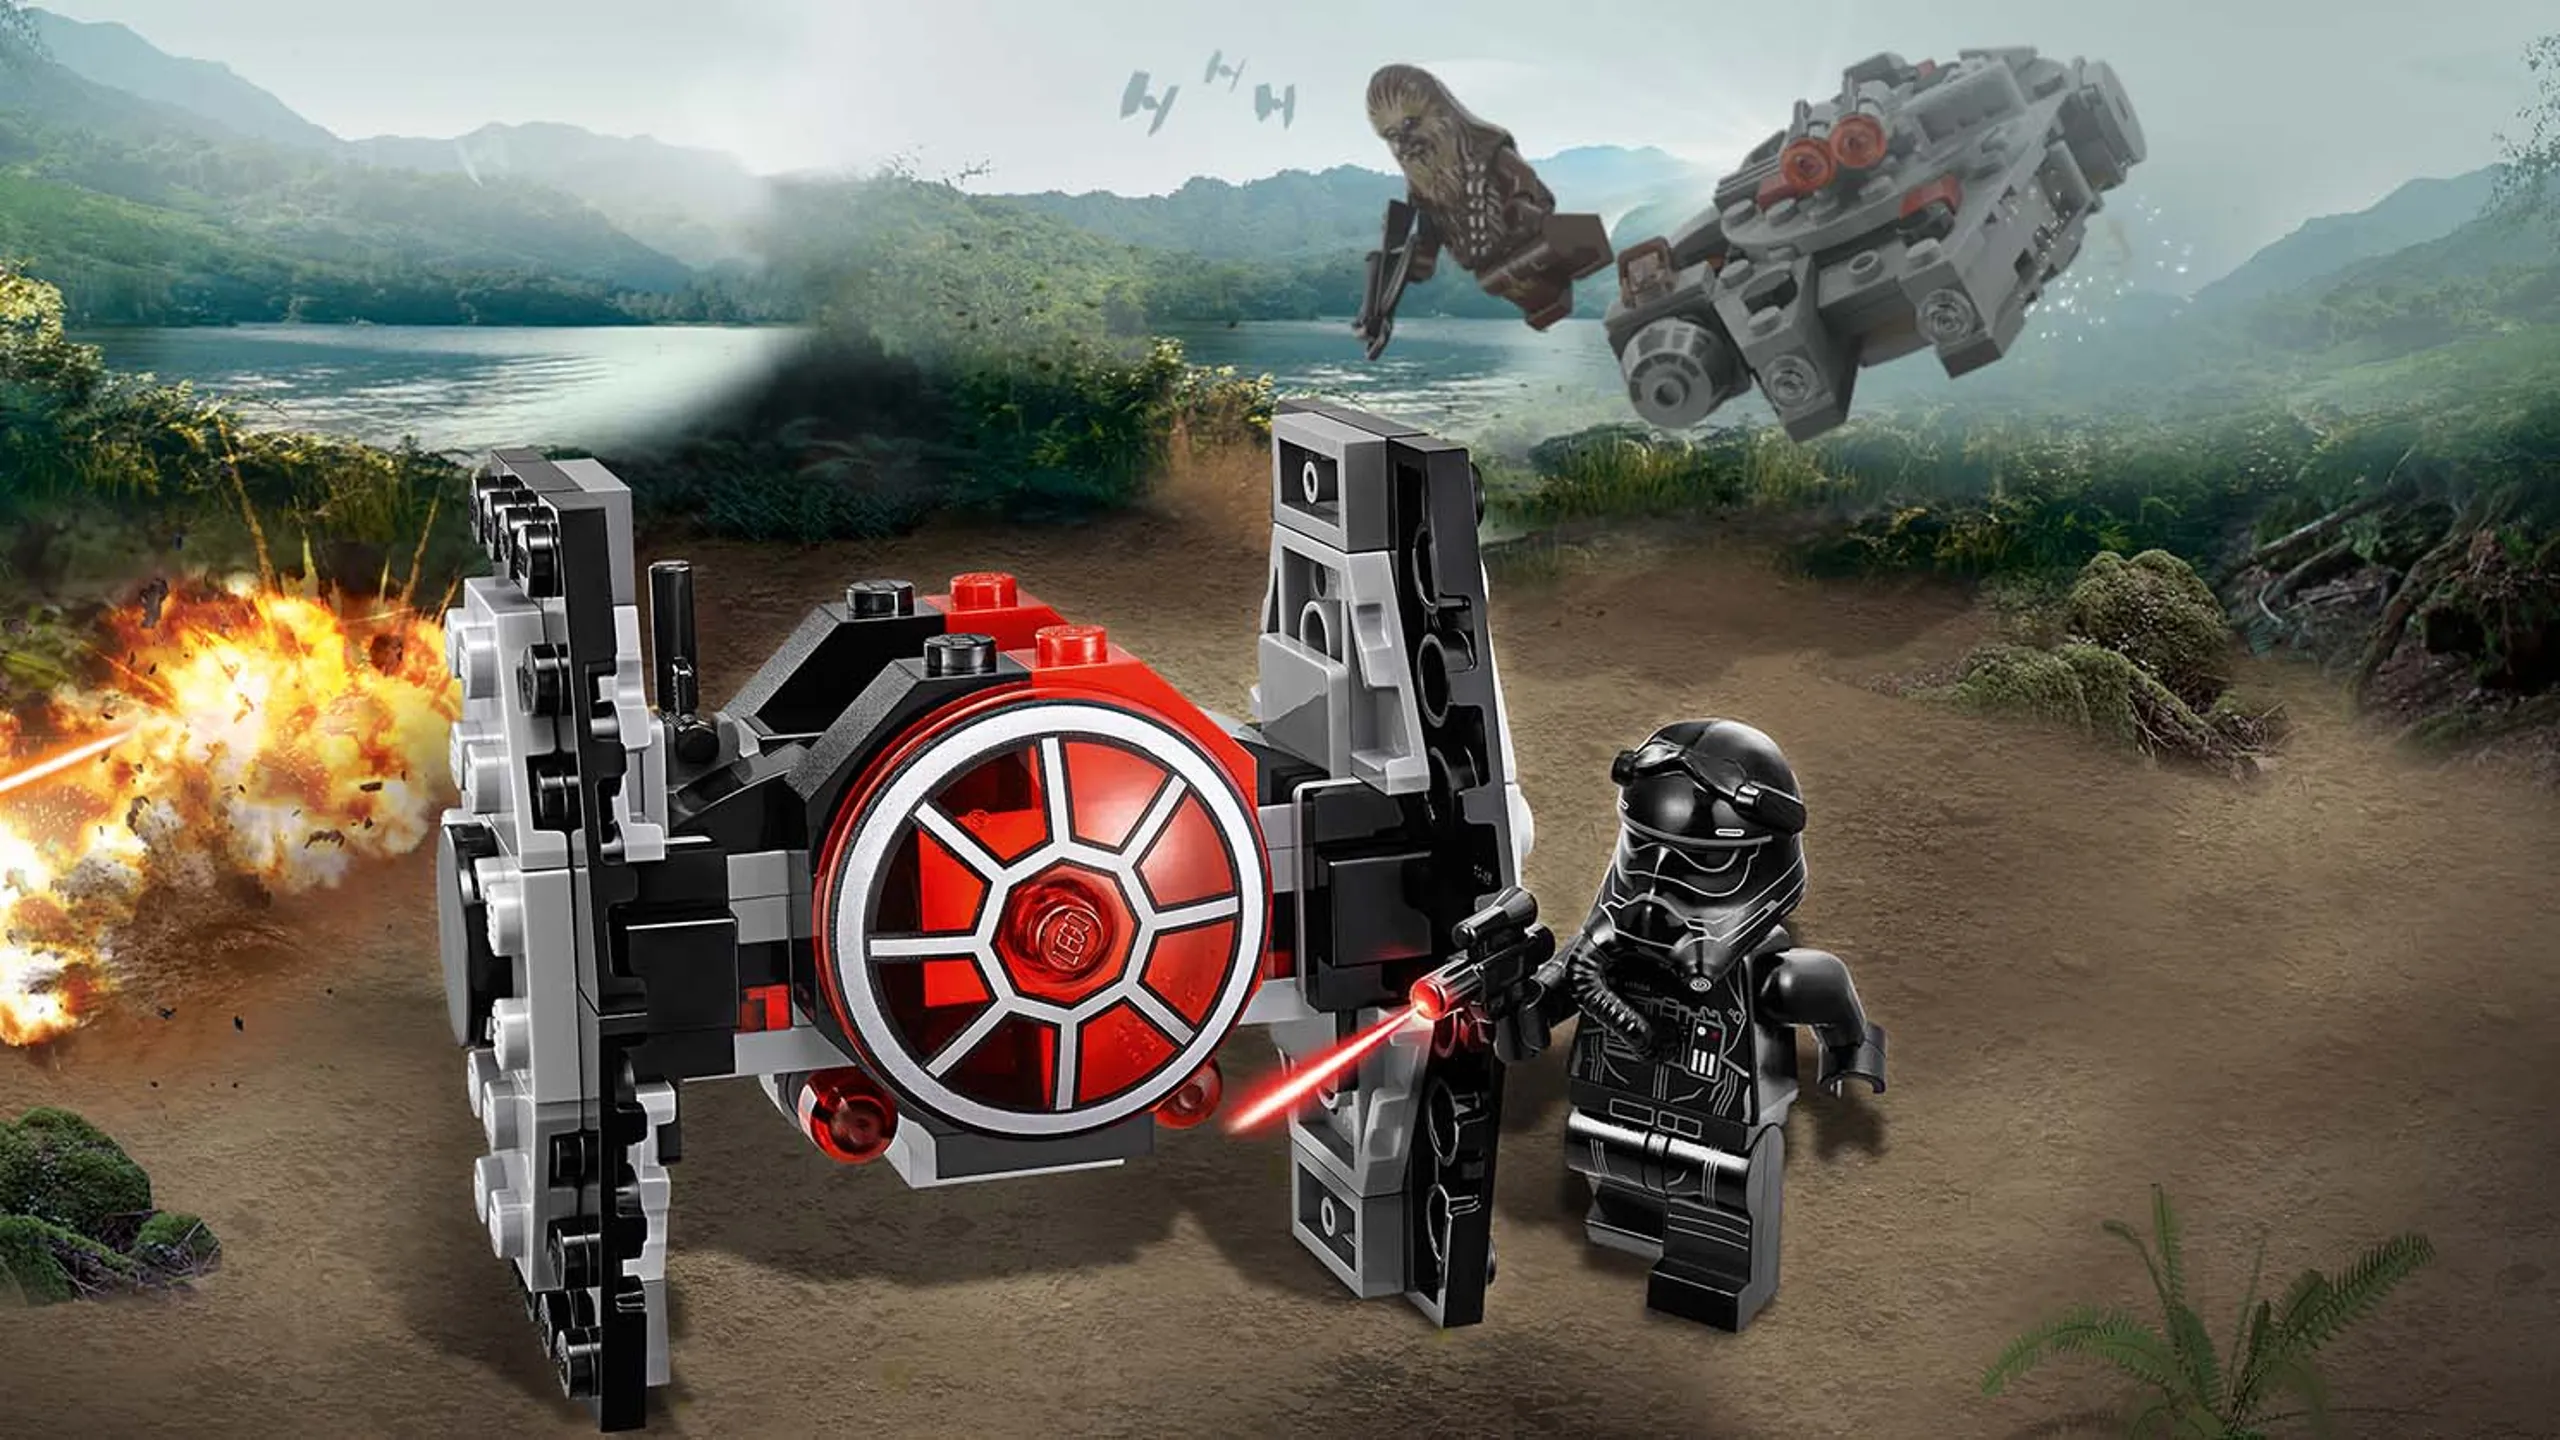 75194 - LEGO Star Wars - First Order TIE Fighter™ Microfighter - Pilot, Missiles, Battle